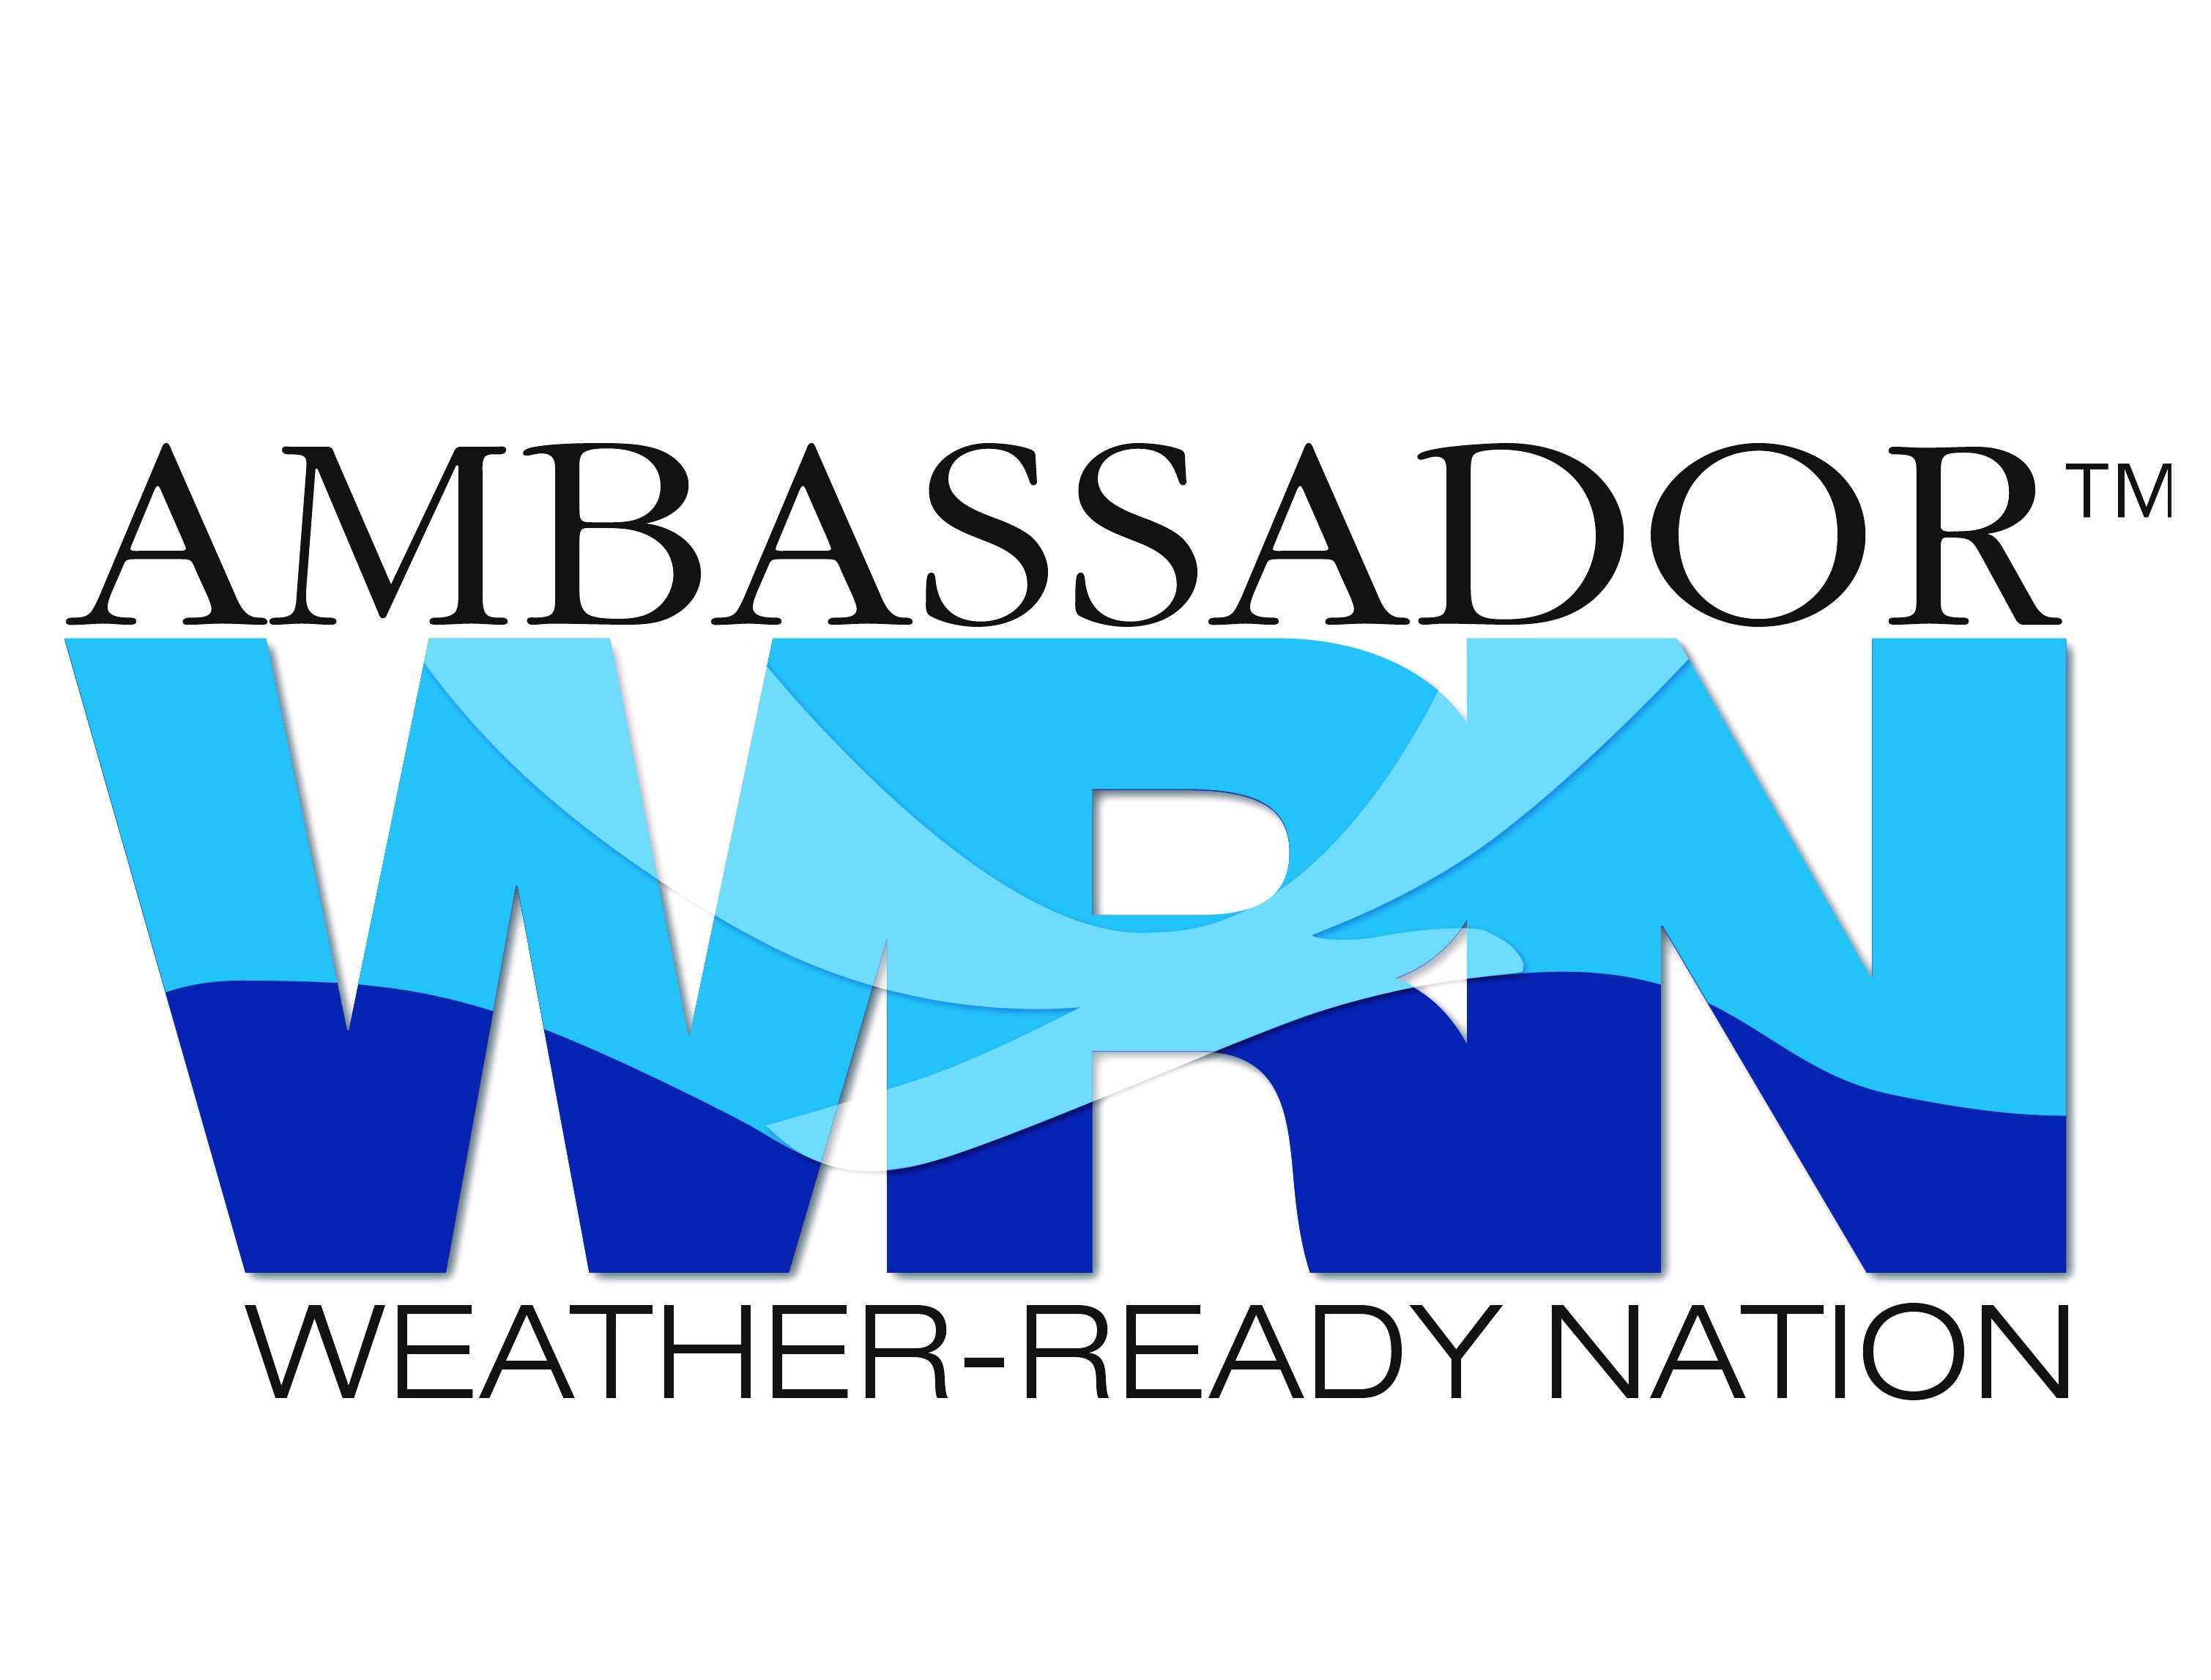 Weather-Ready Nation Ambassador™ and the Weather-Ready Nation Ambassador™ logo are trademarks of the U.S. Department of Commerce, National Oceanic and Atmospheric Administration, used with permission.